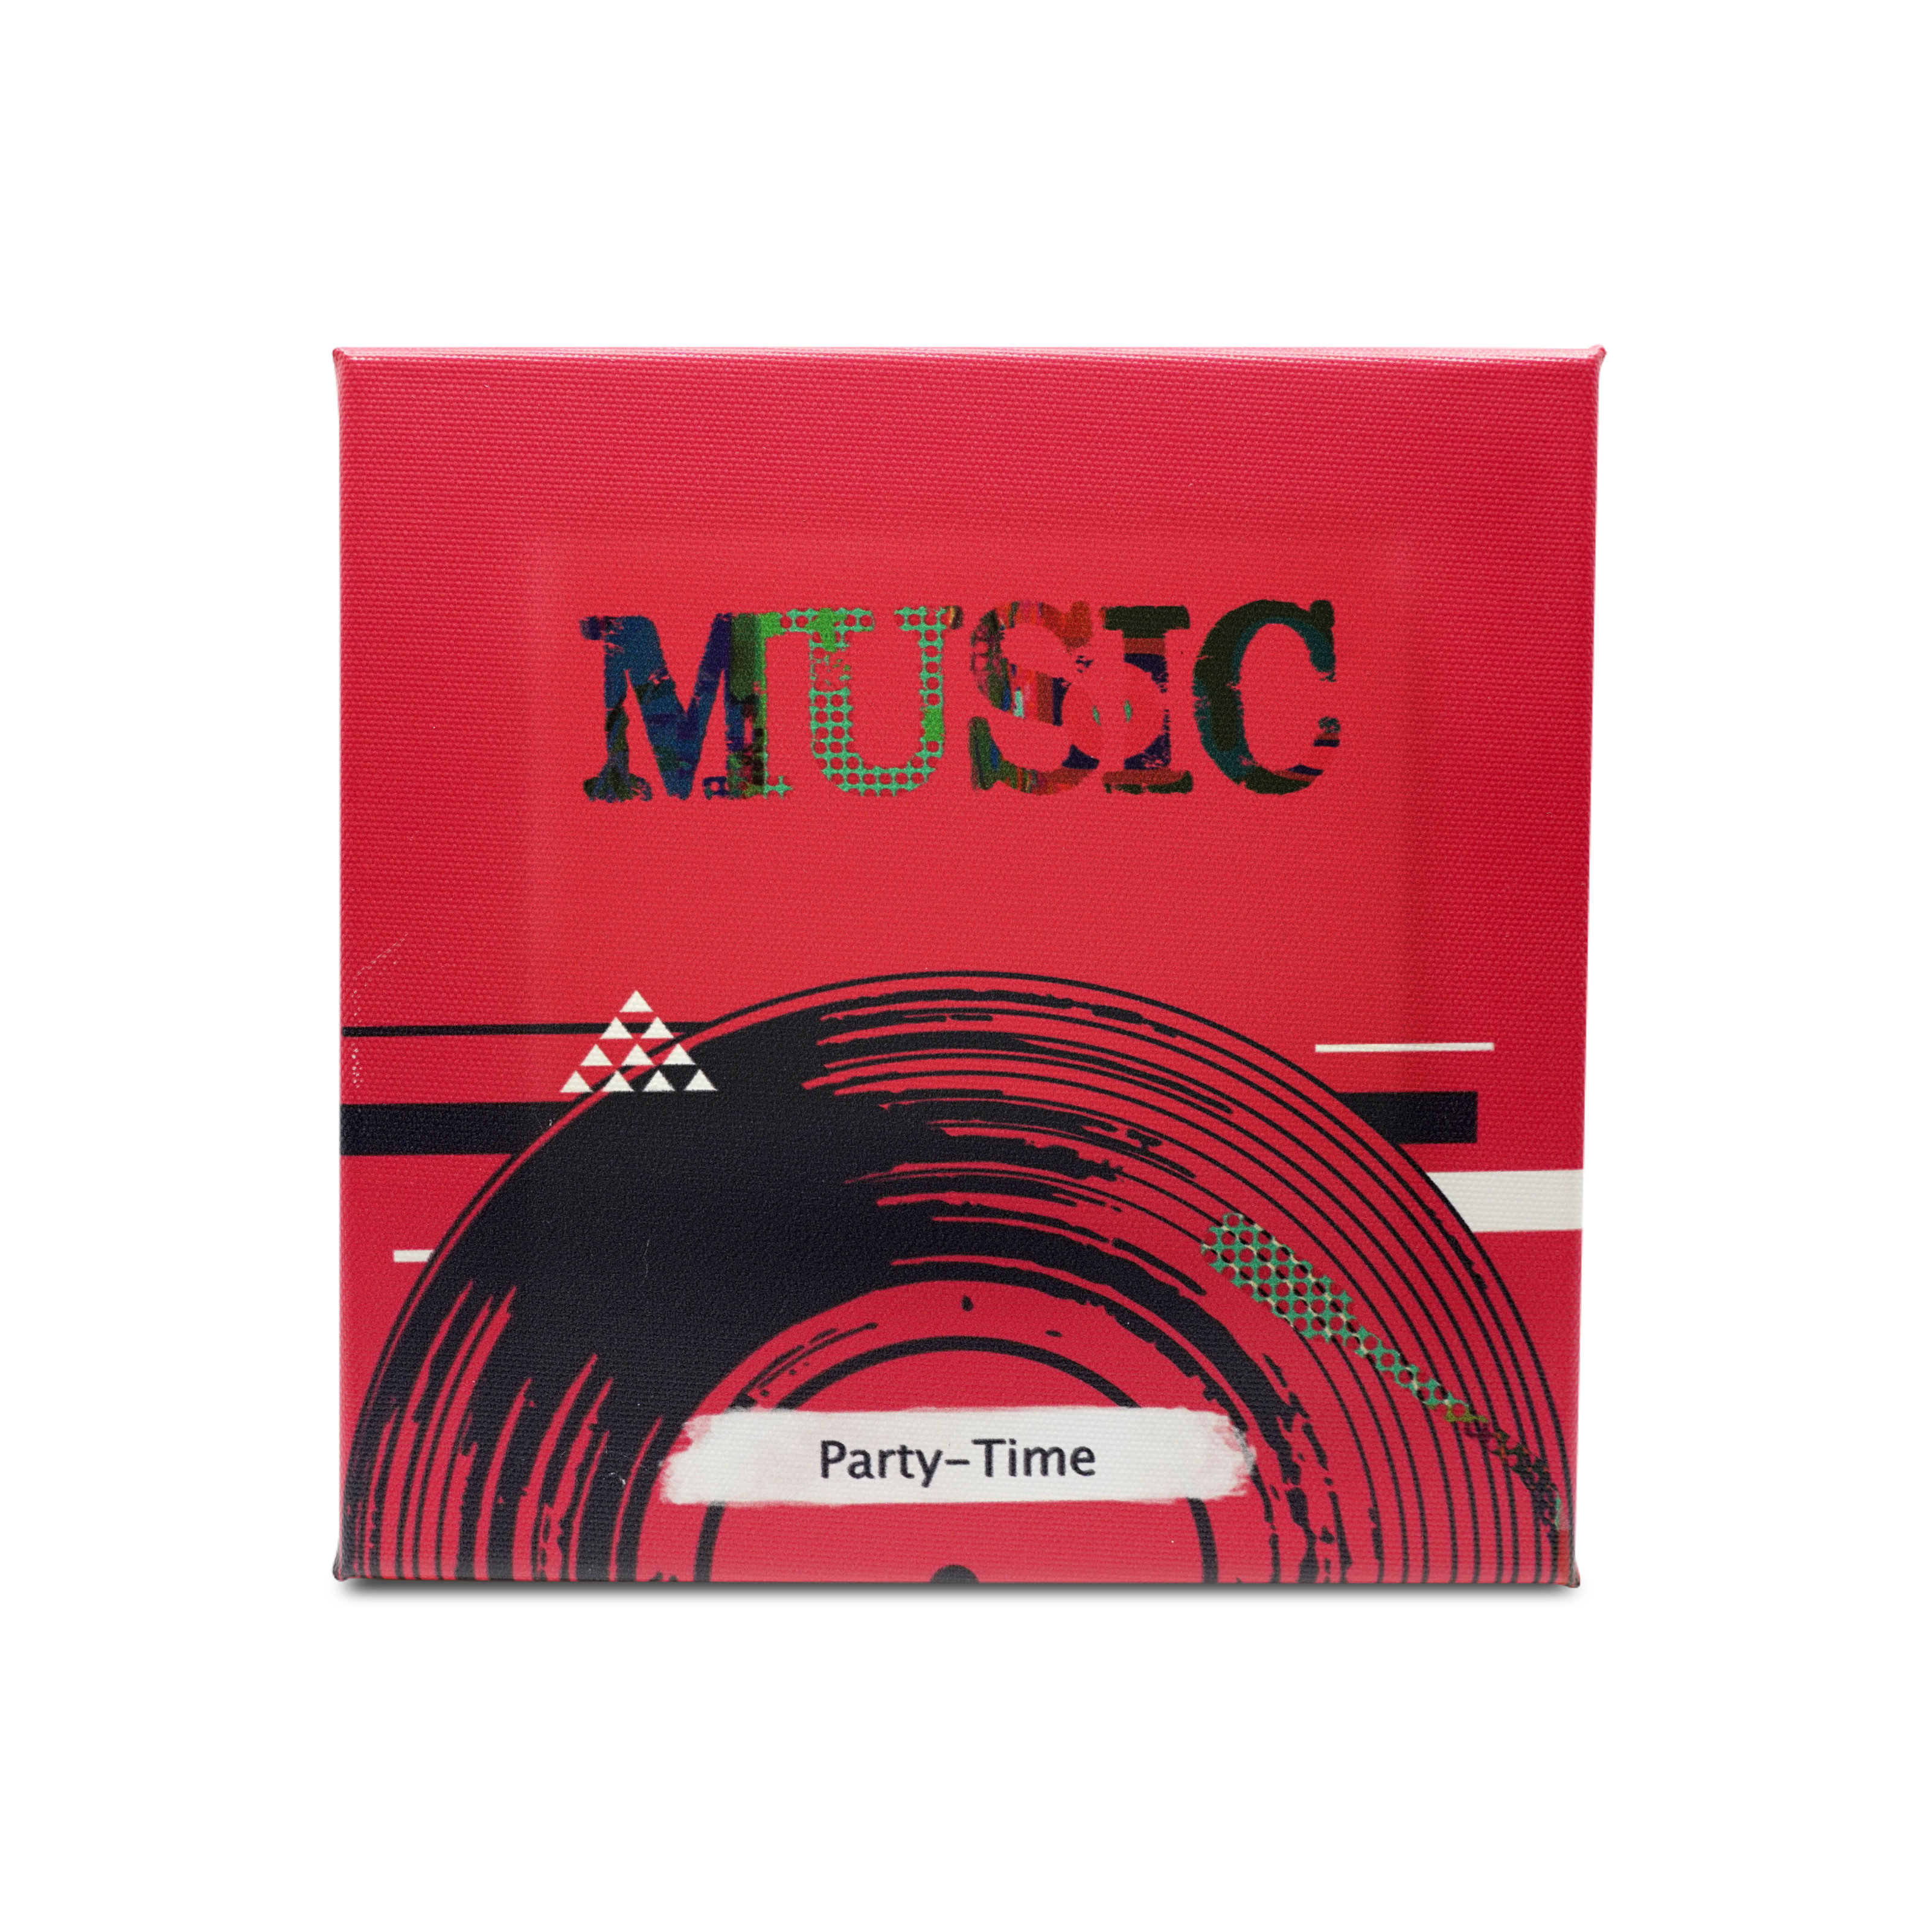 NFC Vibes Party-Time - Digital music canvas - 200 x 200 mm - red